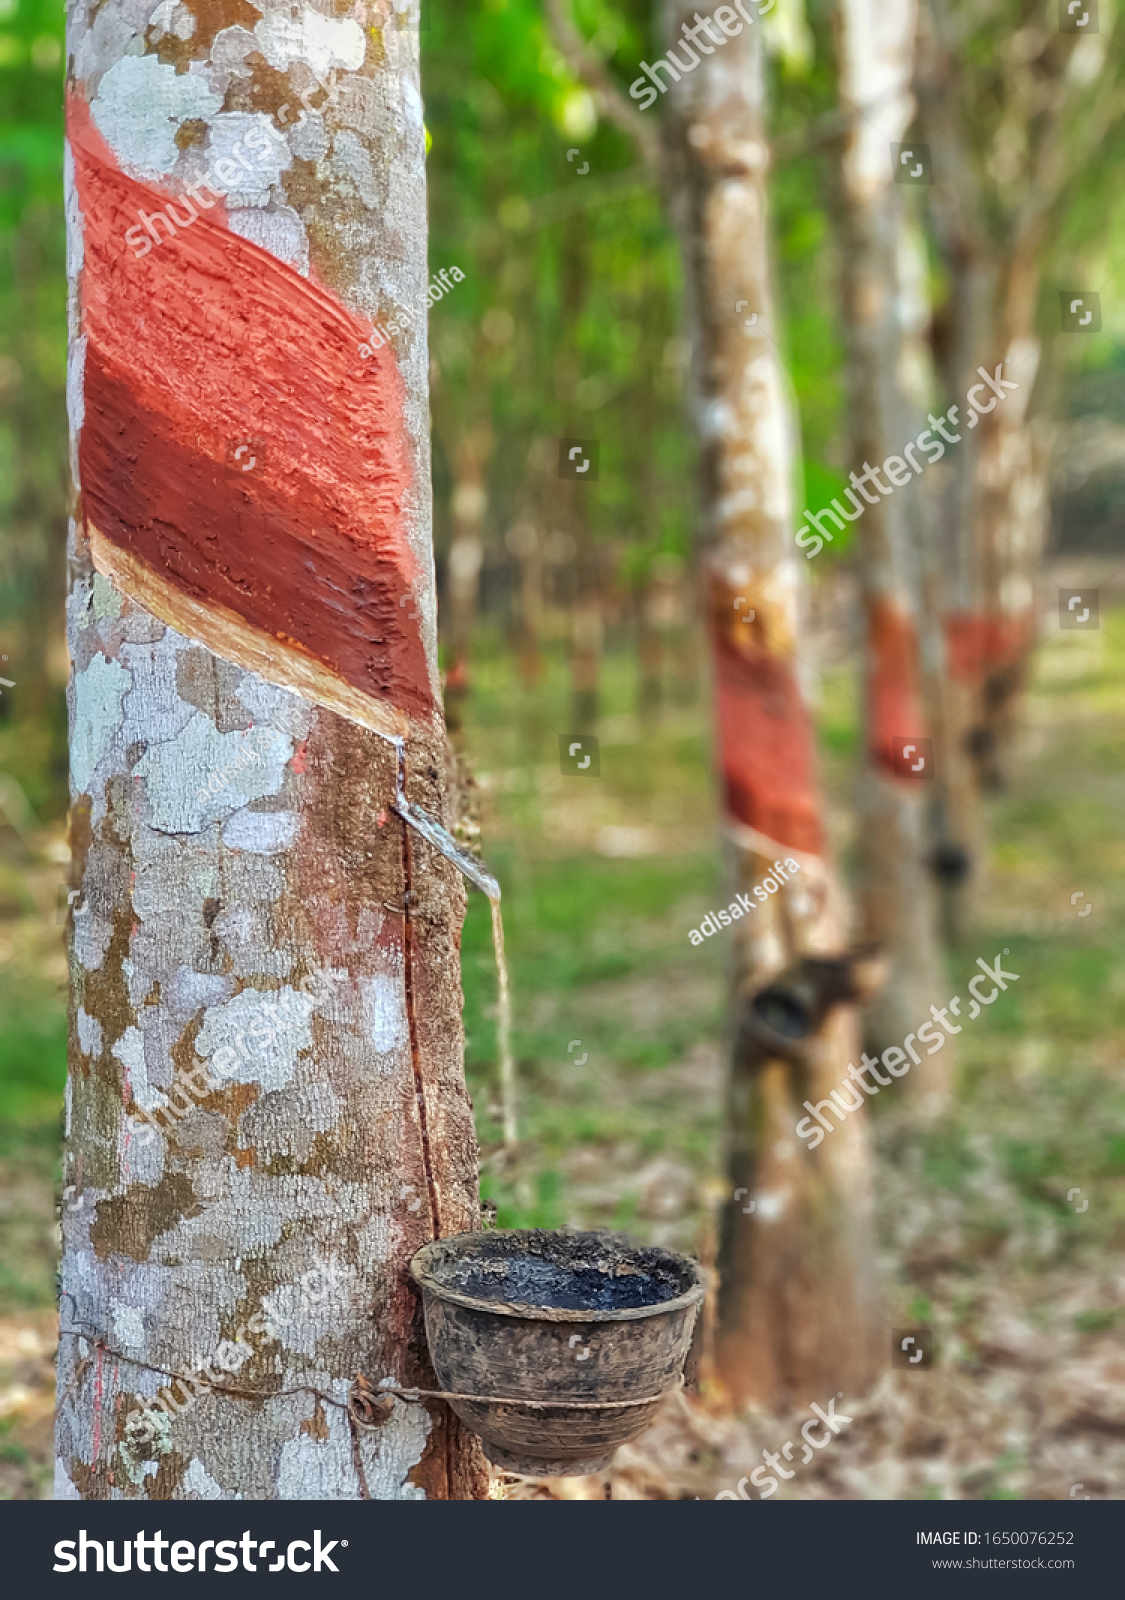 Rubber trees, with rubber tapping. #1650076252